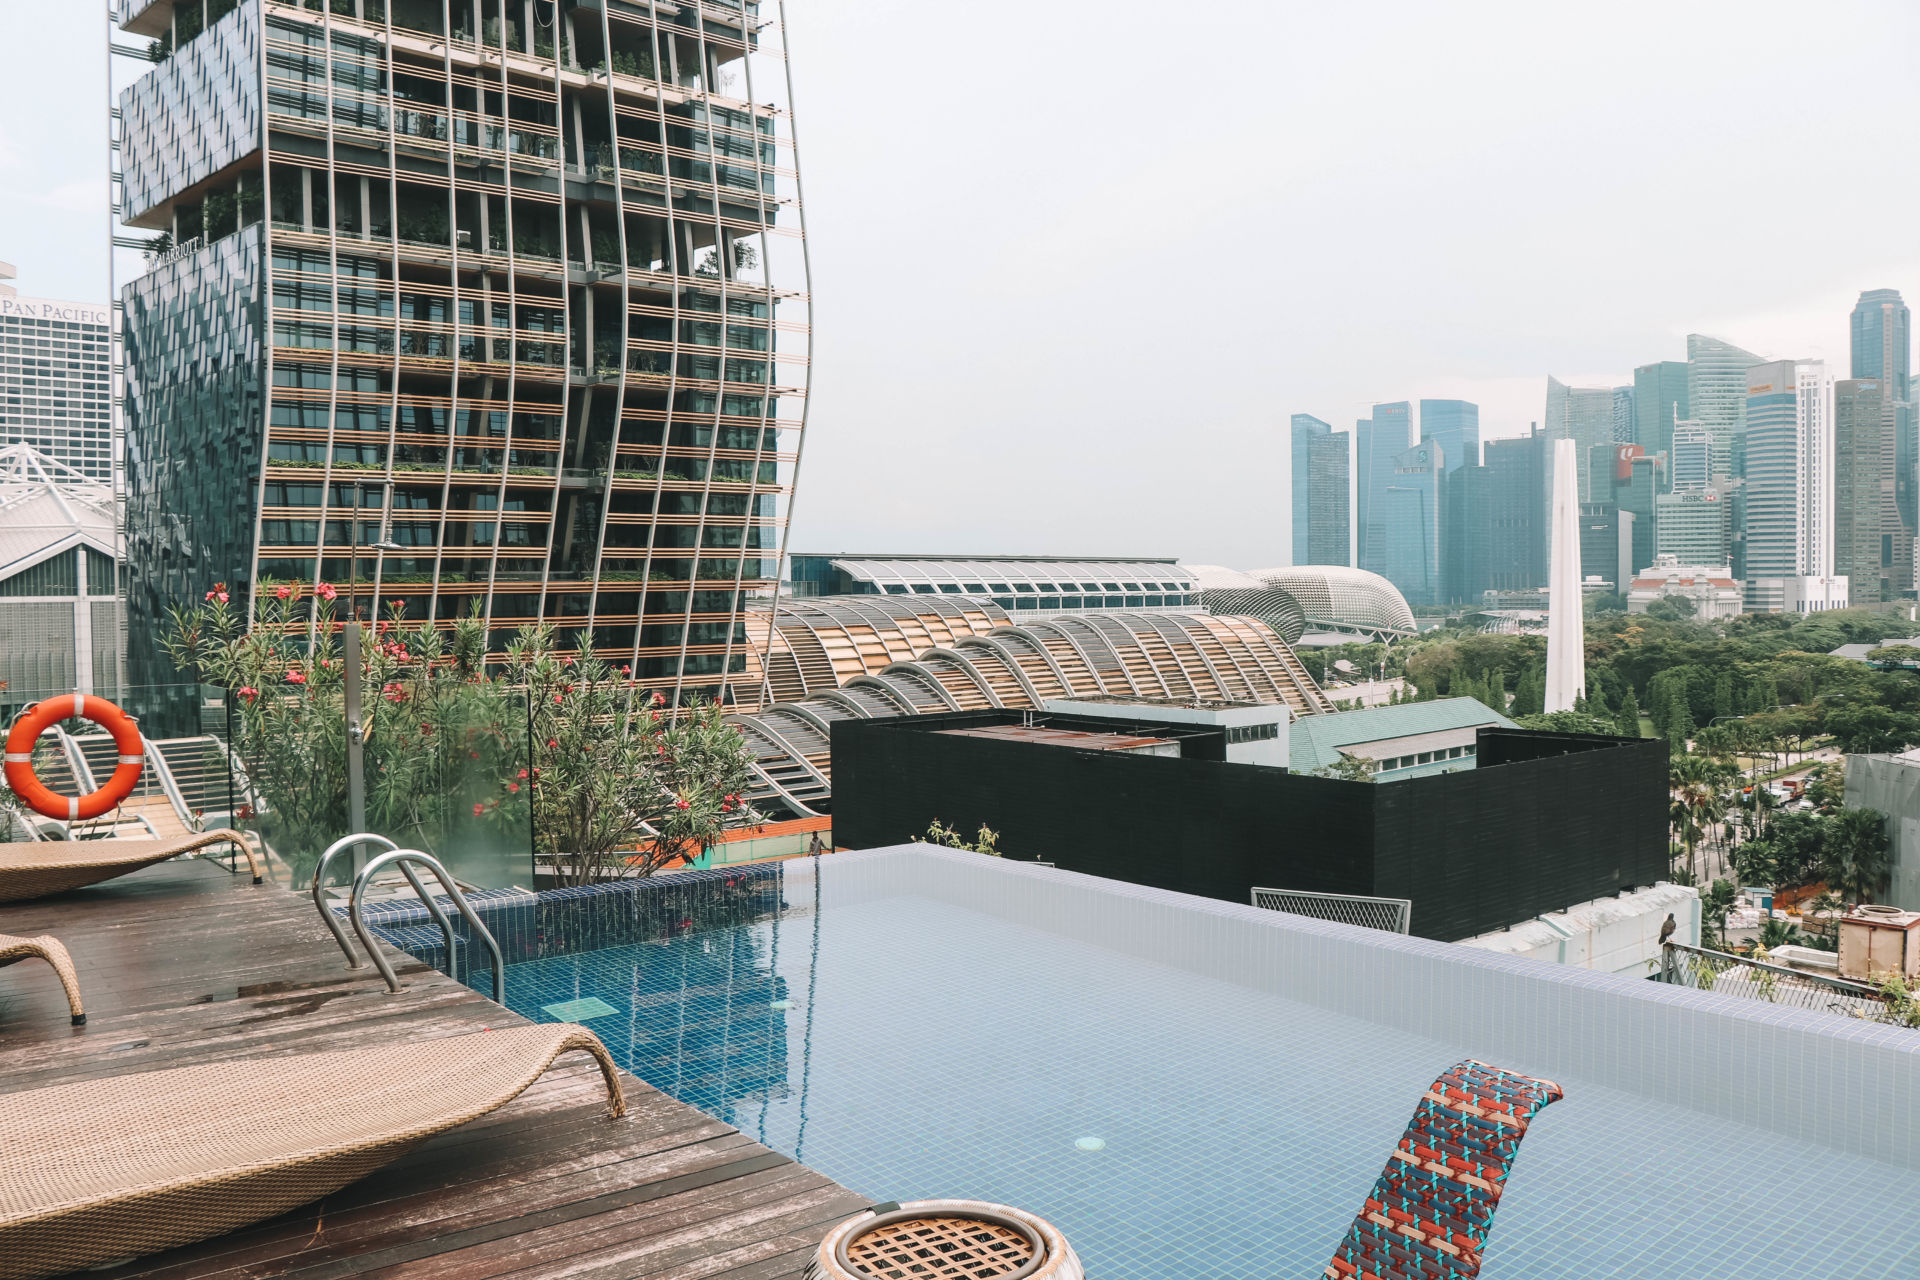 The ULTIMATE Guide To Singapore: How To Spend 3 Days In Singapore